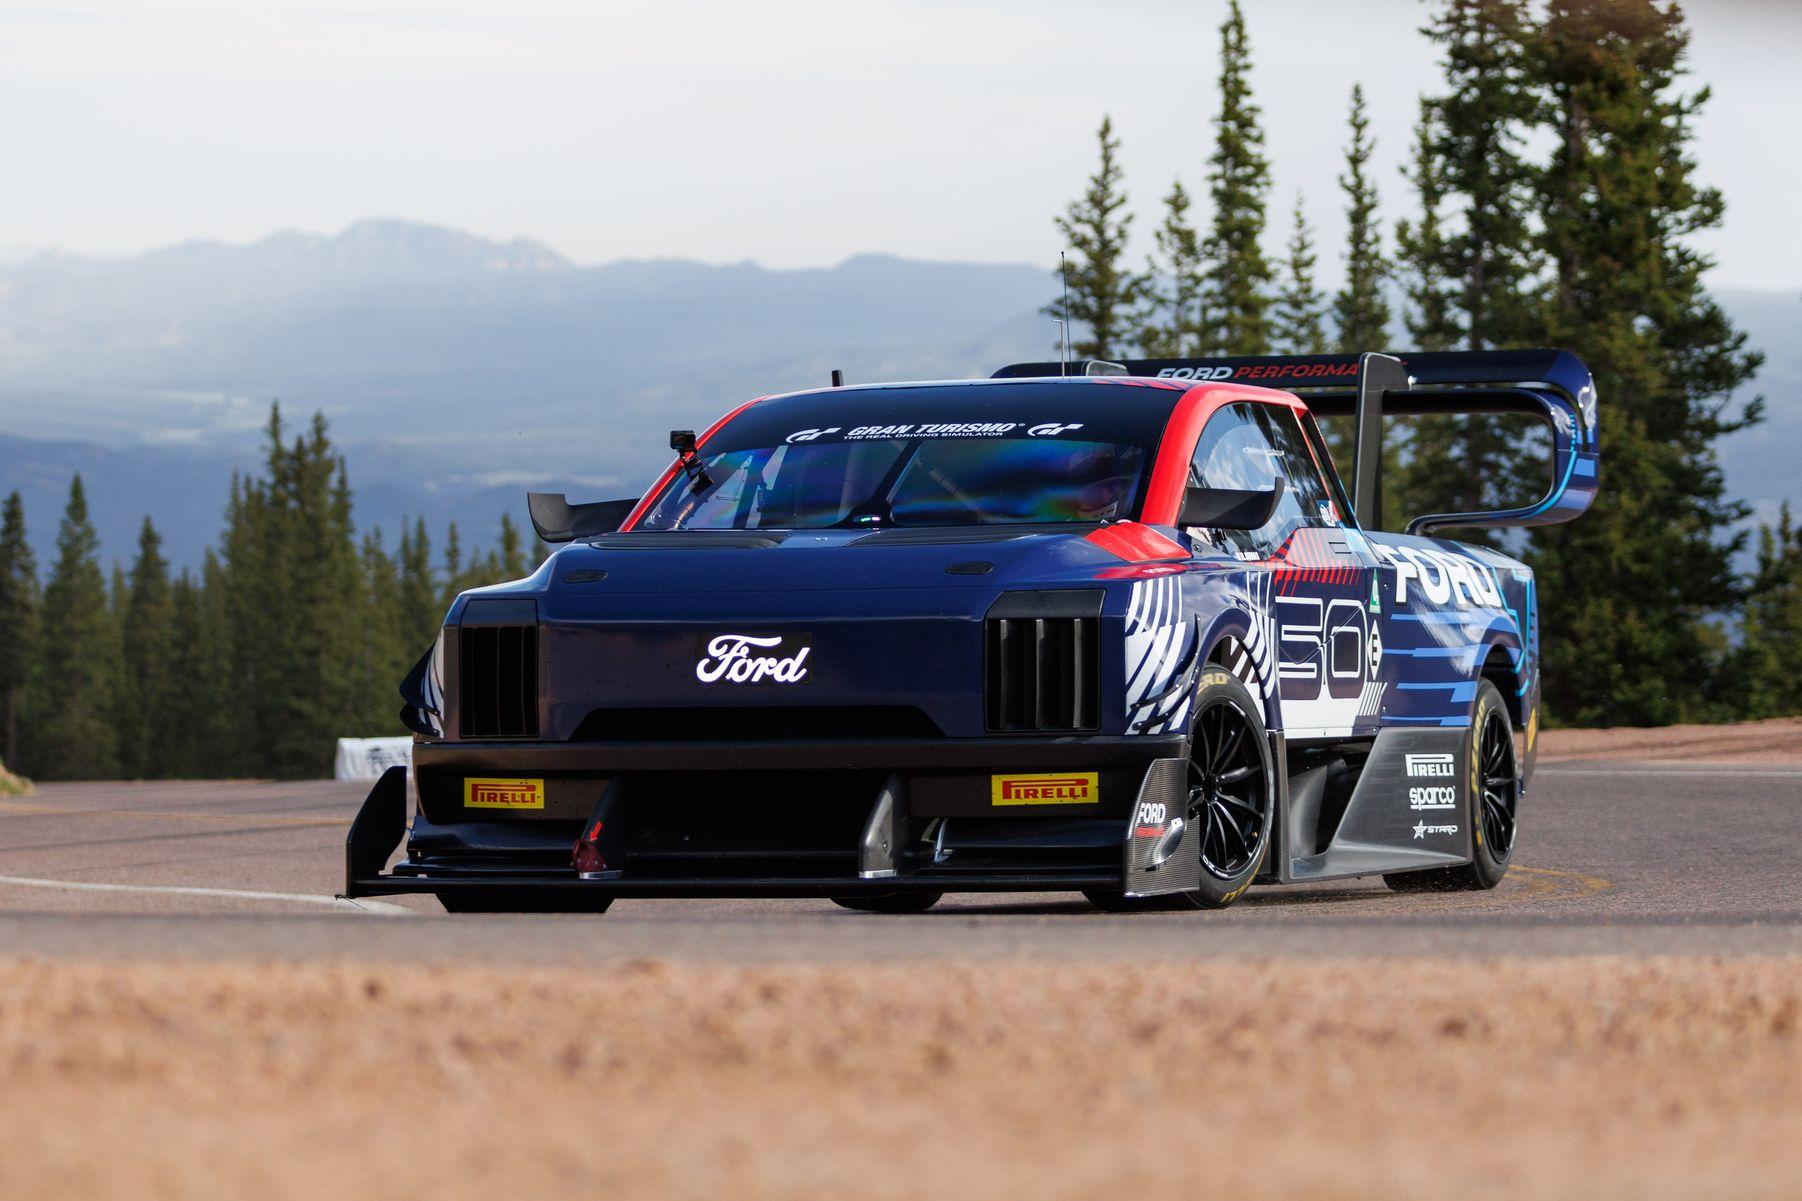 Pirelli Celebrates F-150 Lightning SuperTruck's Victory at Pikes Peak with P Zero Tire Excellence